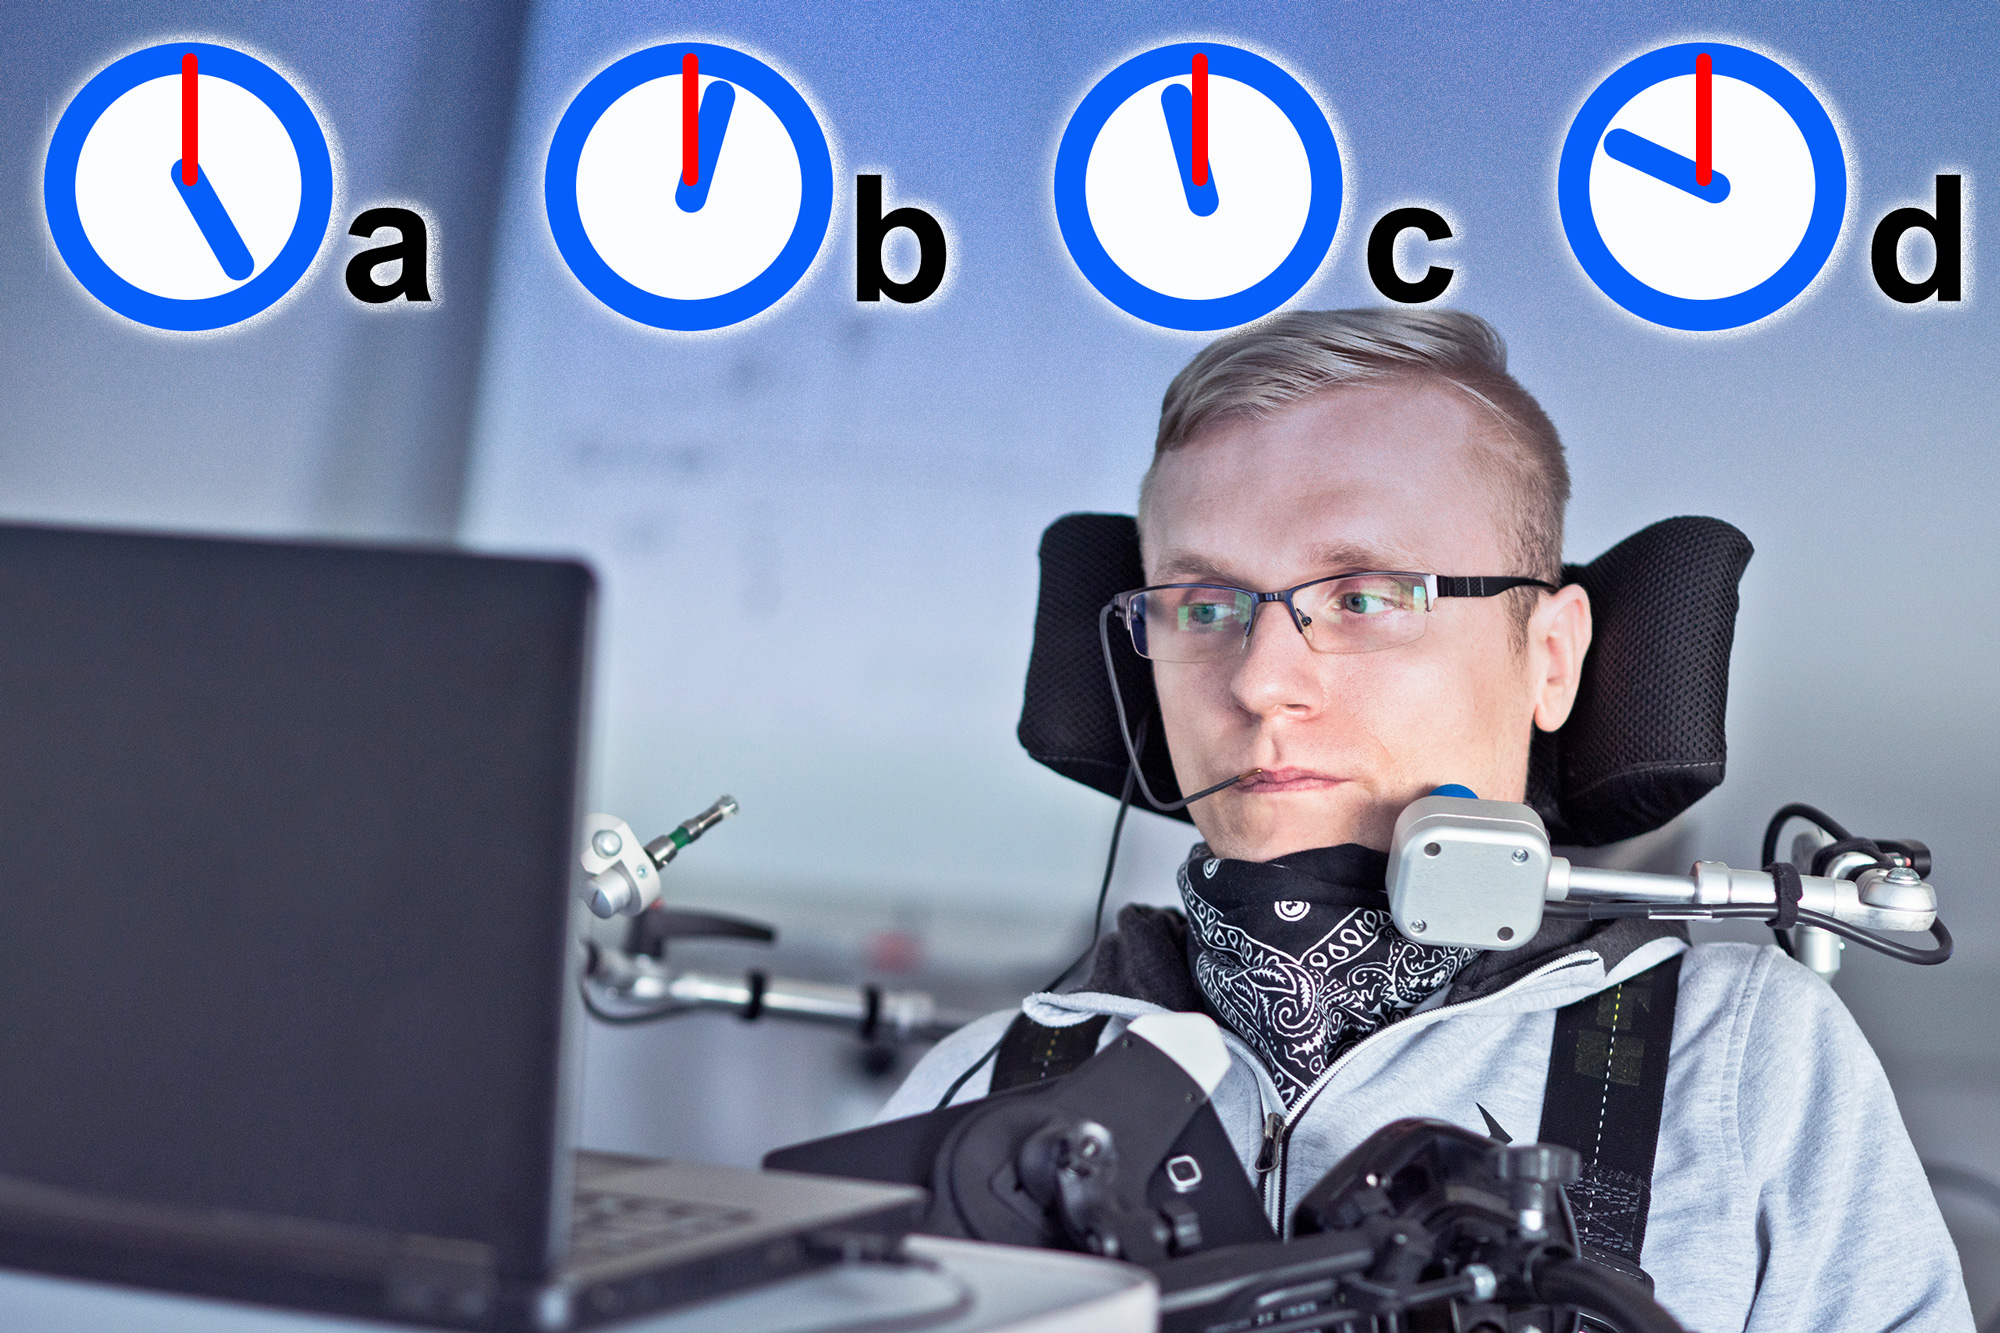 System helps severely motor-impaired individuals type more quickly and accurately